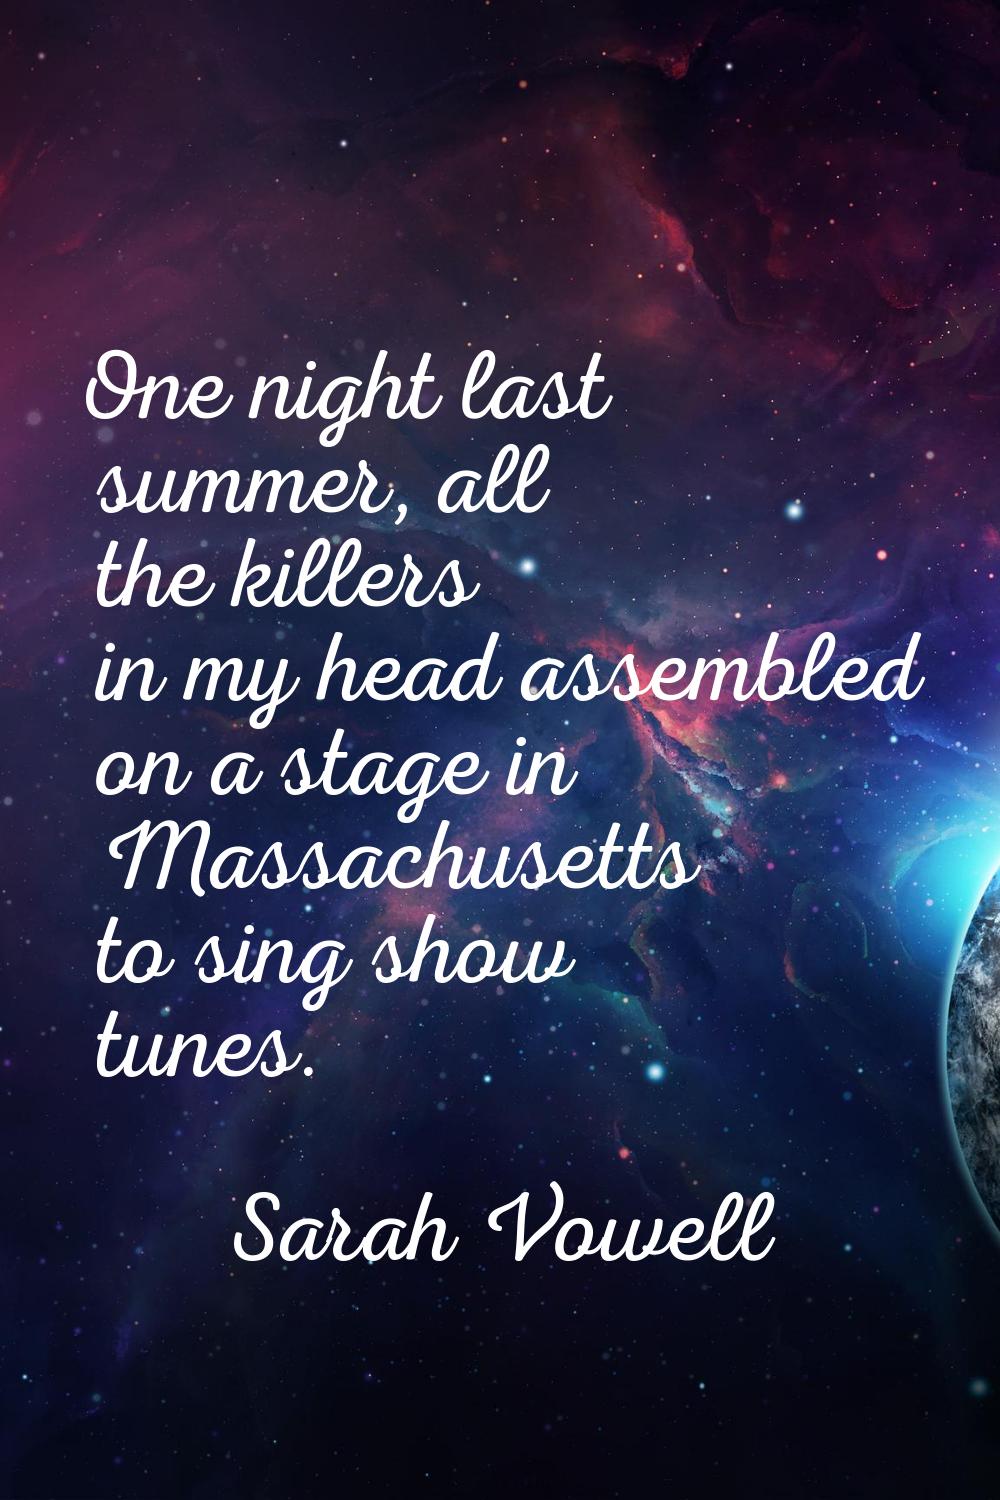 One night last summer, all the killers in my head assembled on a stage in Massachusetts to sing sho